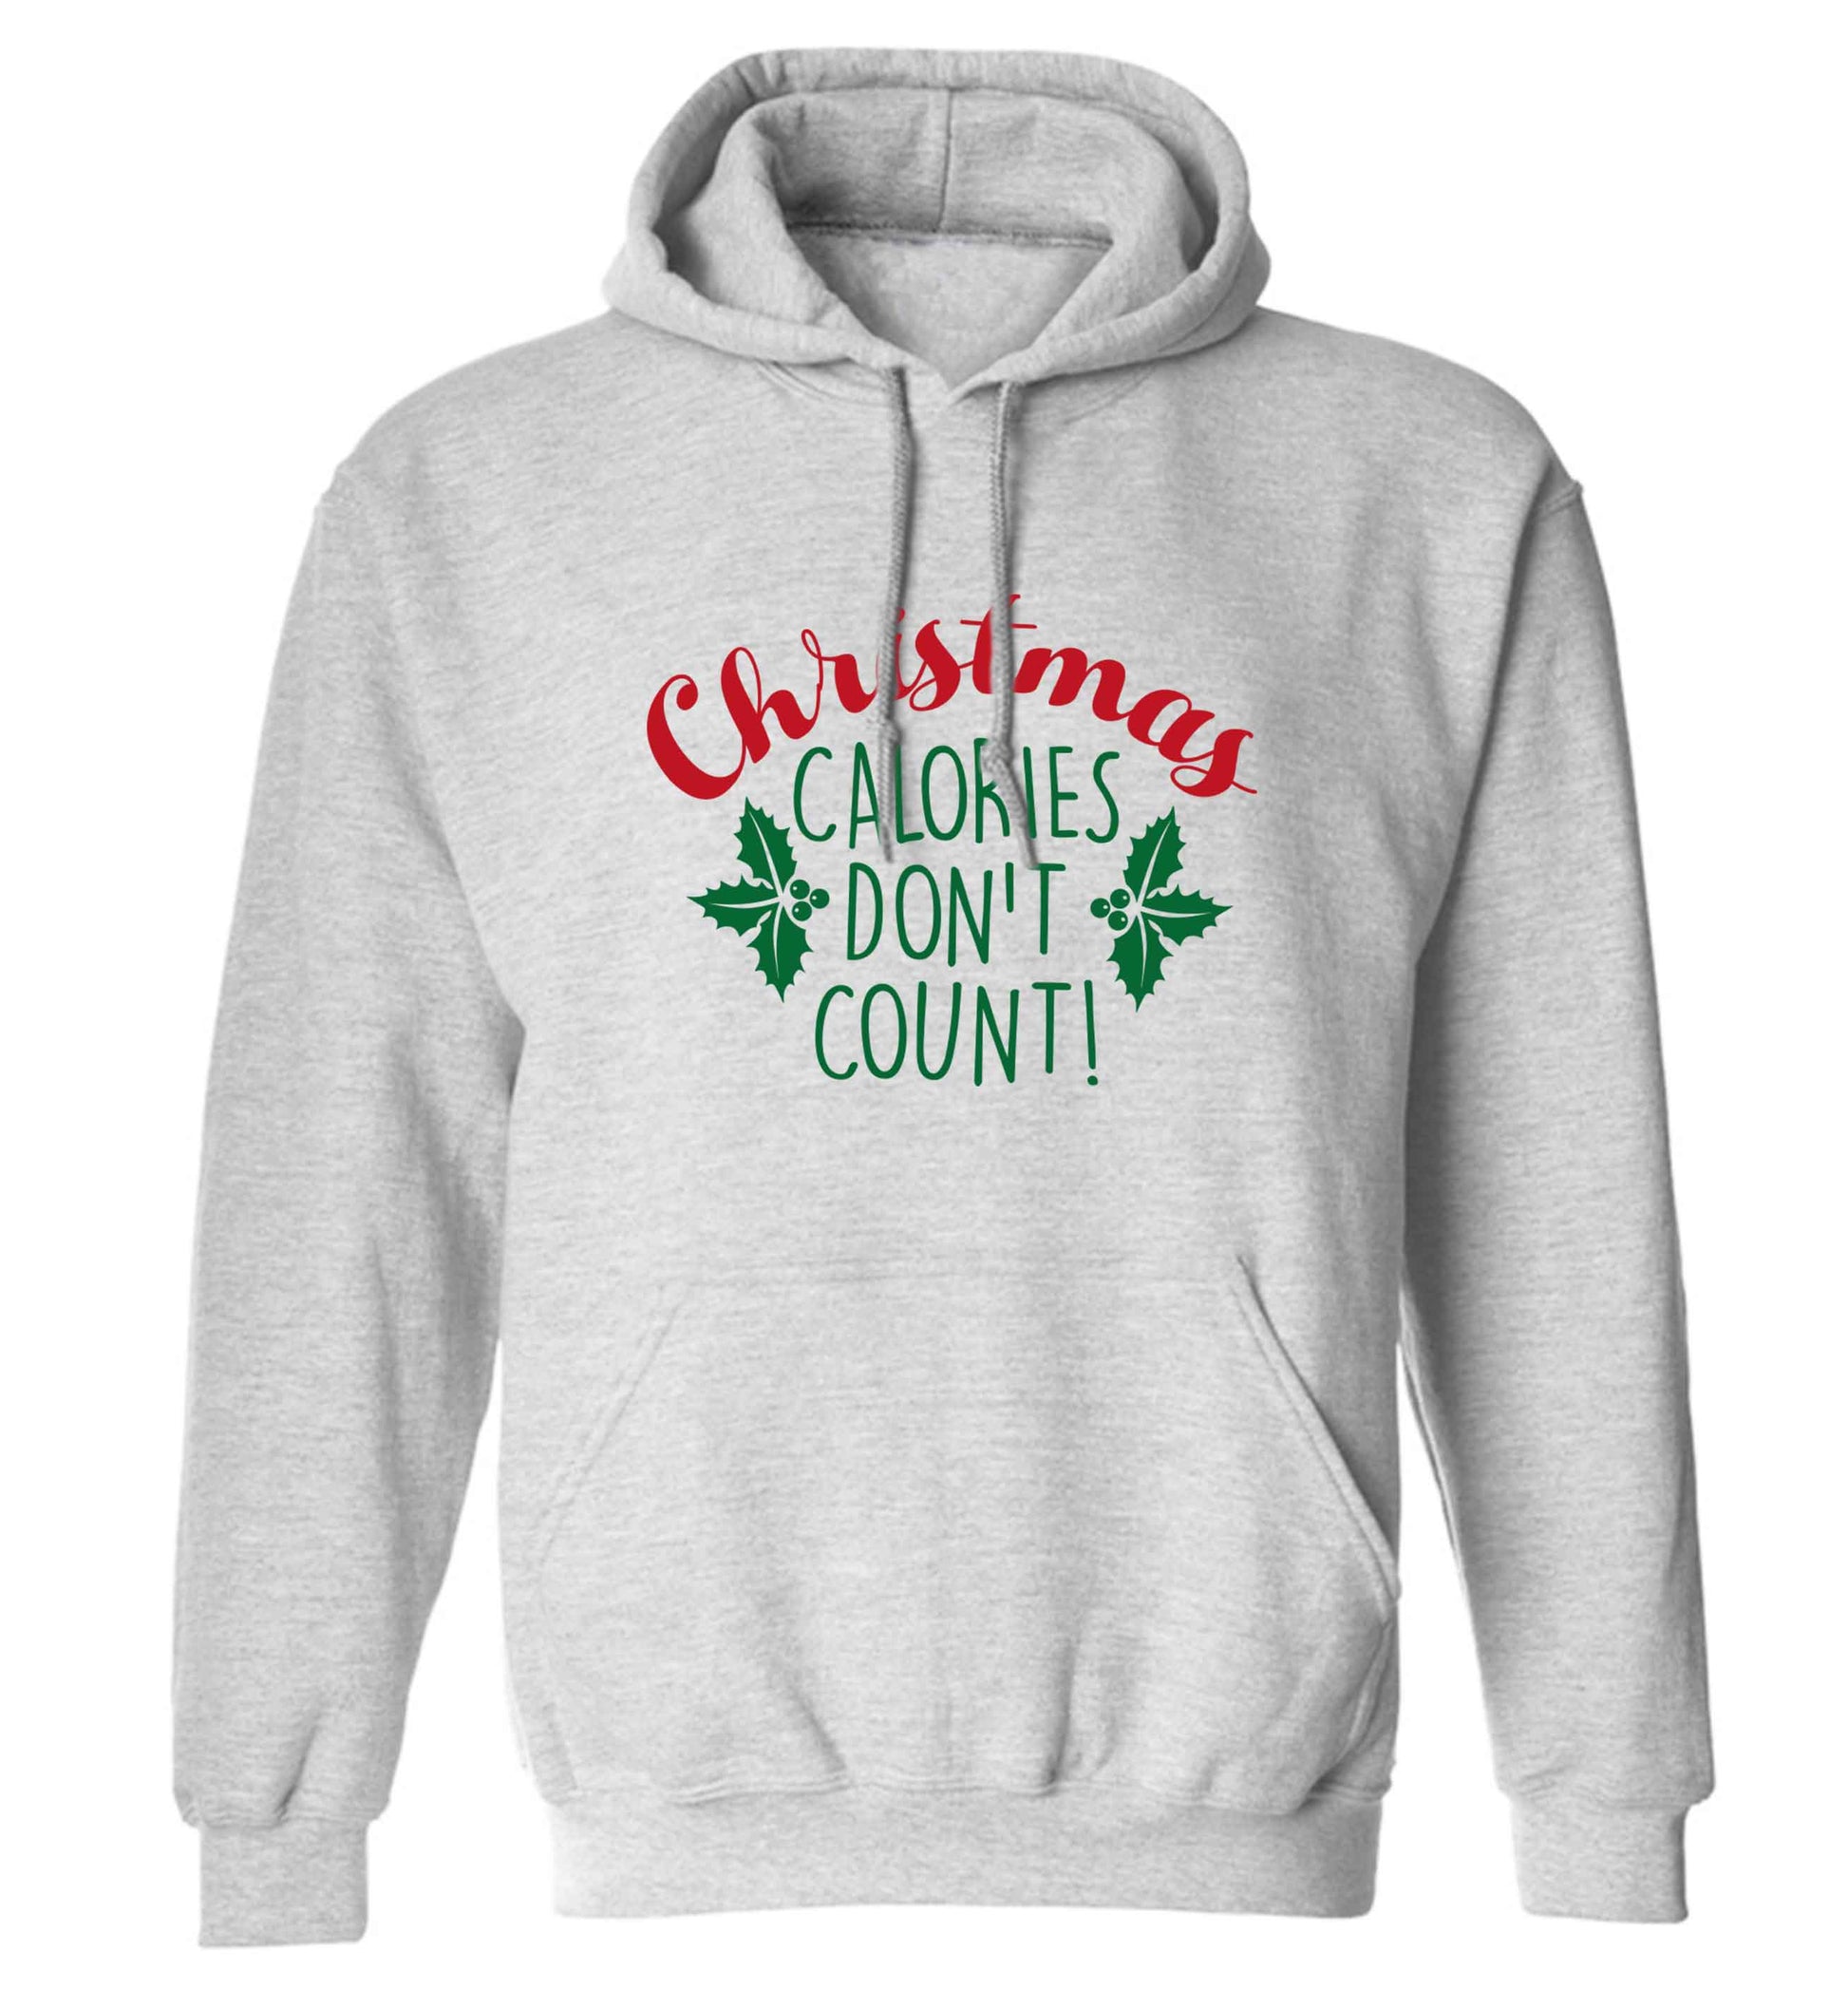 Christmas calories don't count adults unisex grey hoodie 2XL